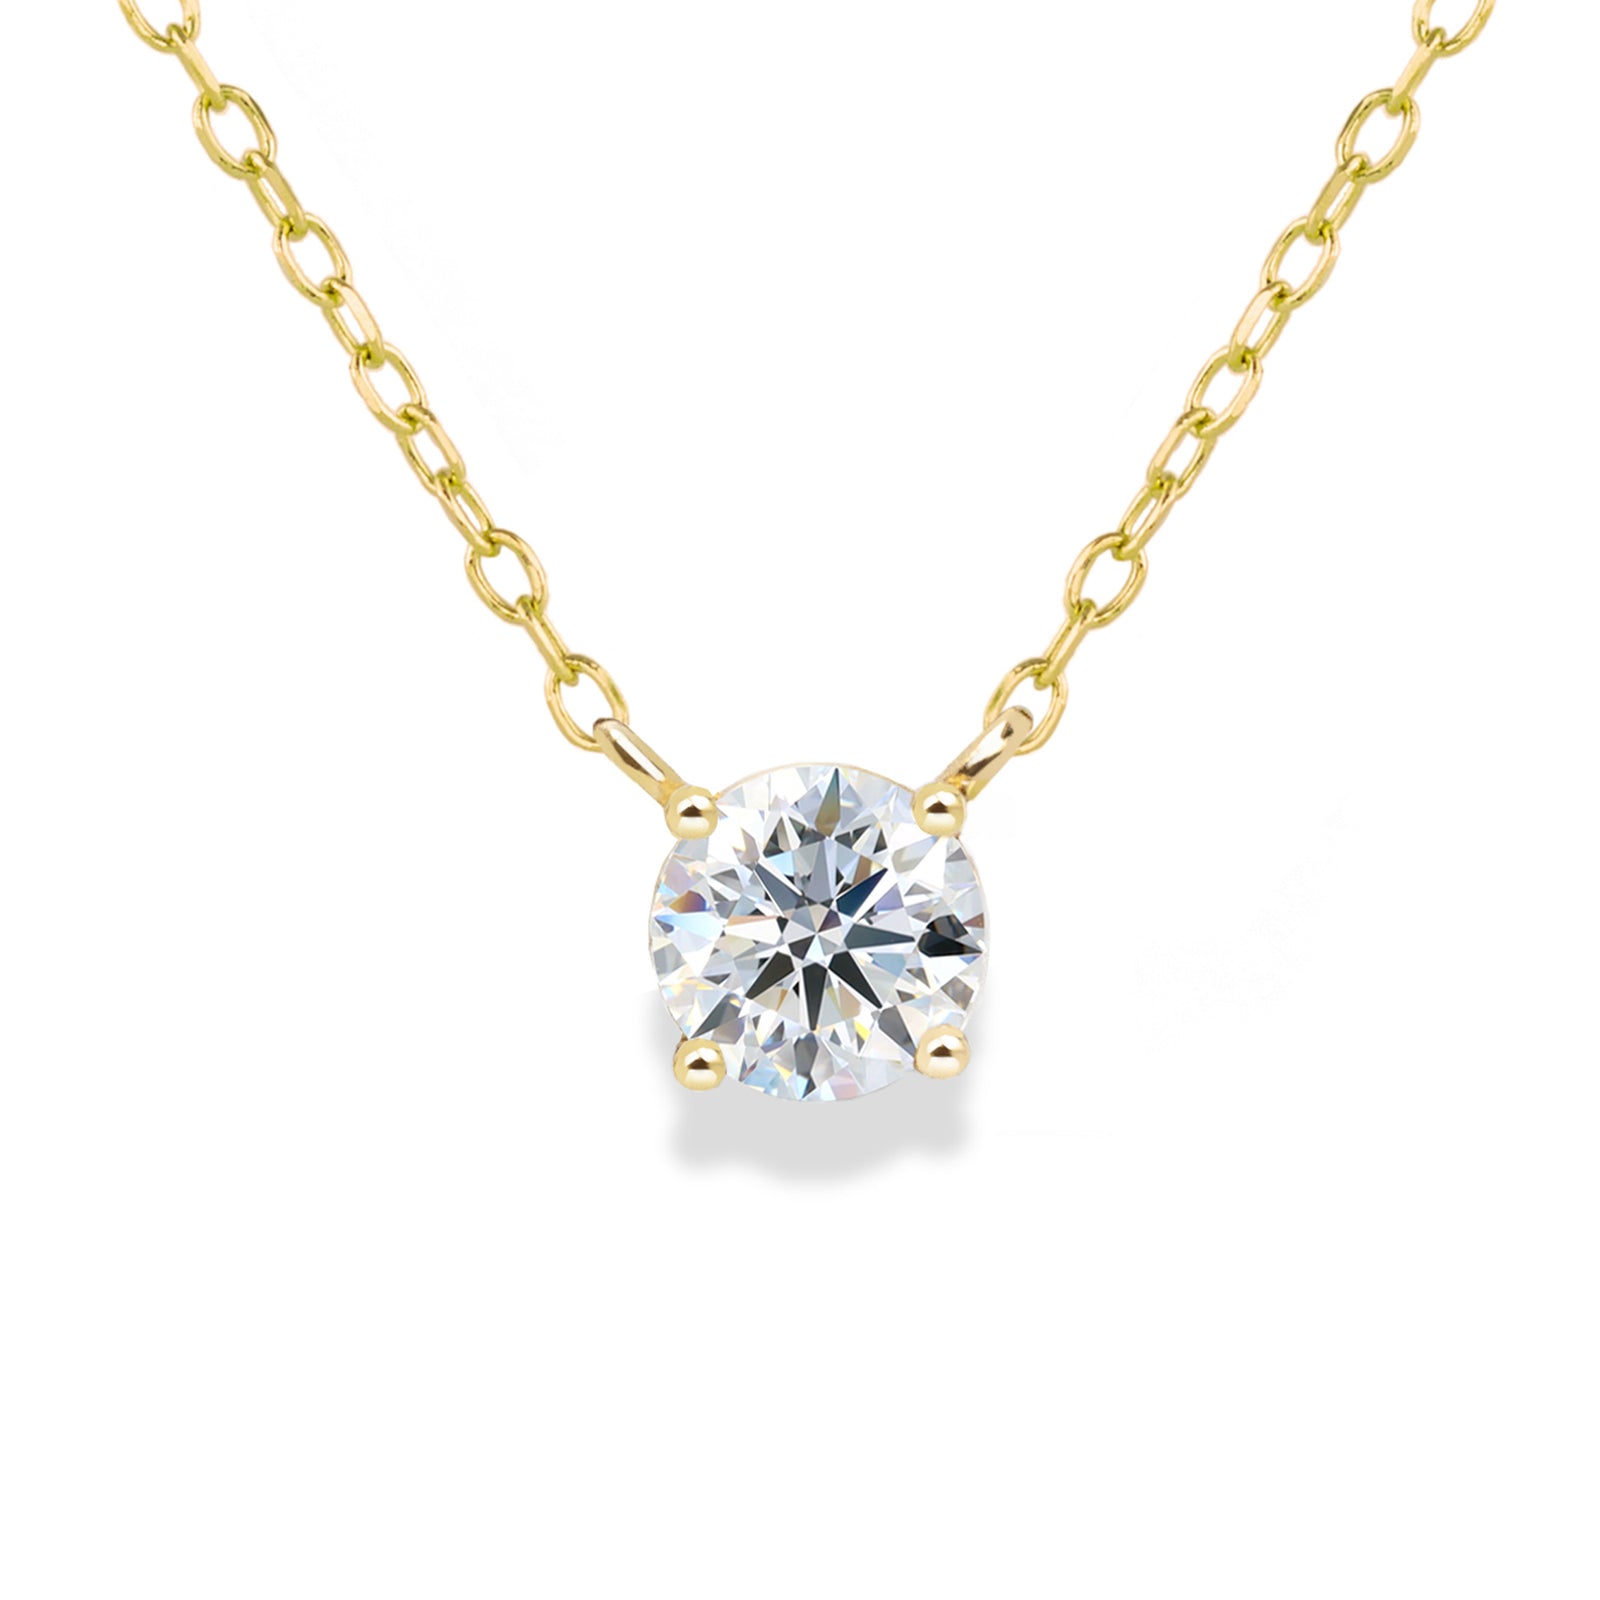 Jamie Park Jewelry - Round Diamond Solitaire Necklace This Round Diamond Solitaire Necklace features a sparkling lab diamond, set in a classic four prong design. With each diamond certified by IGI, this necklace makes for a timeless and cherished gift, perfect for any special occasion. Add a touch of elegance to any outfit with this beautiful piece. Chain length 16-18"&nbsp;